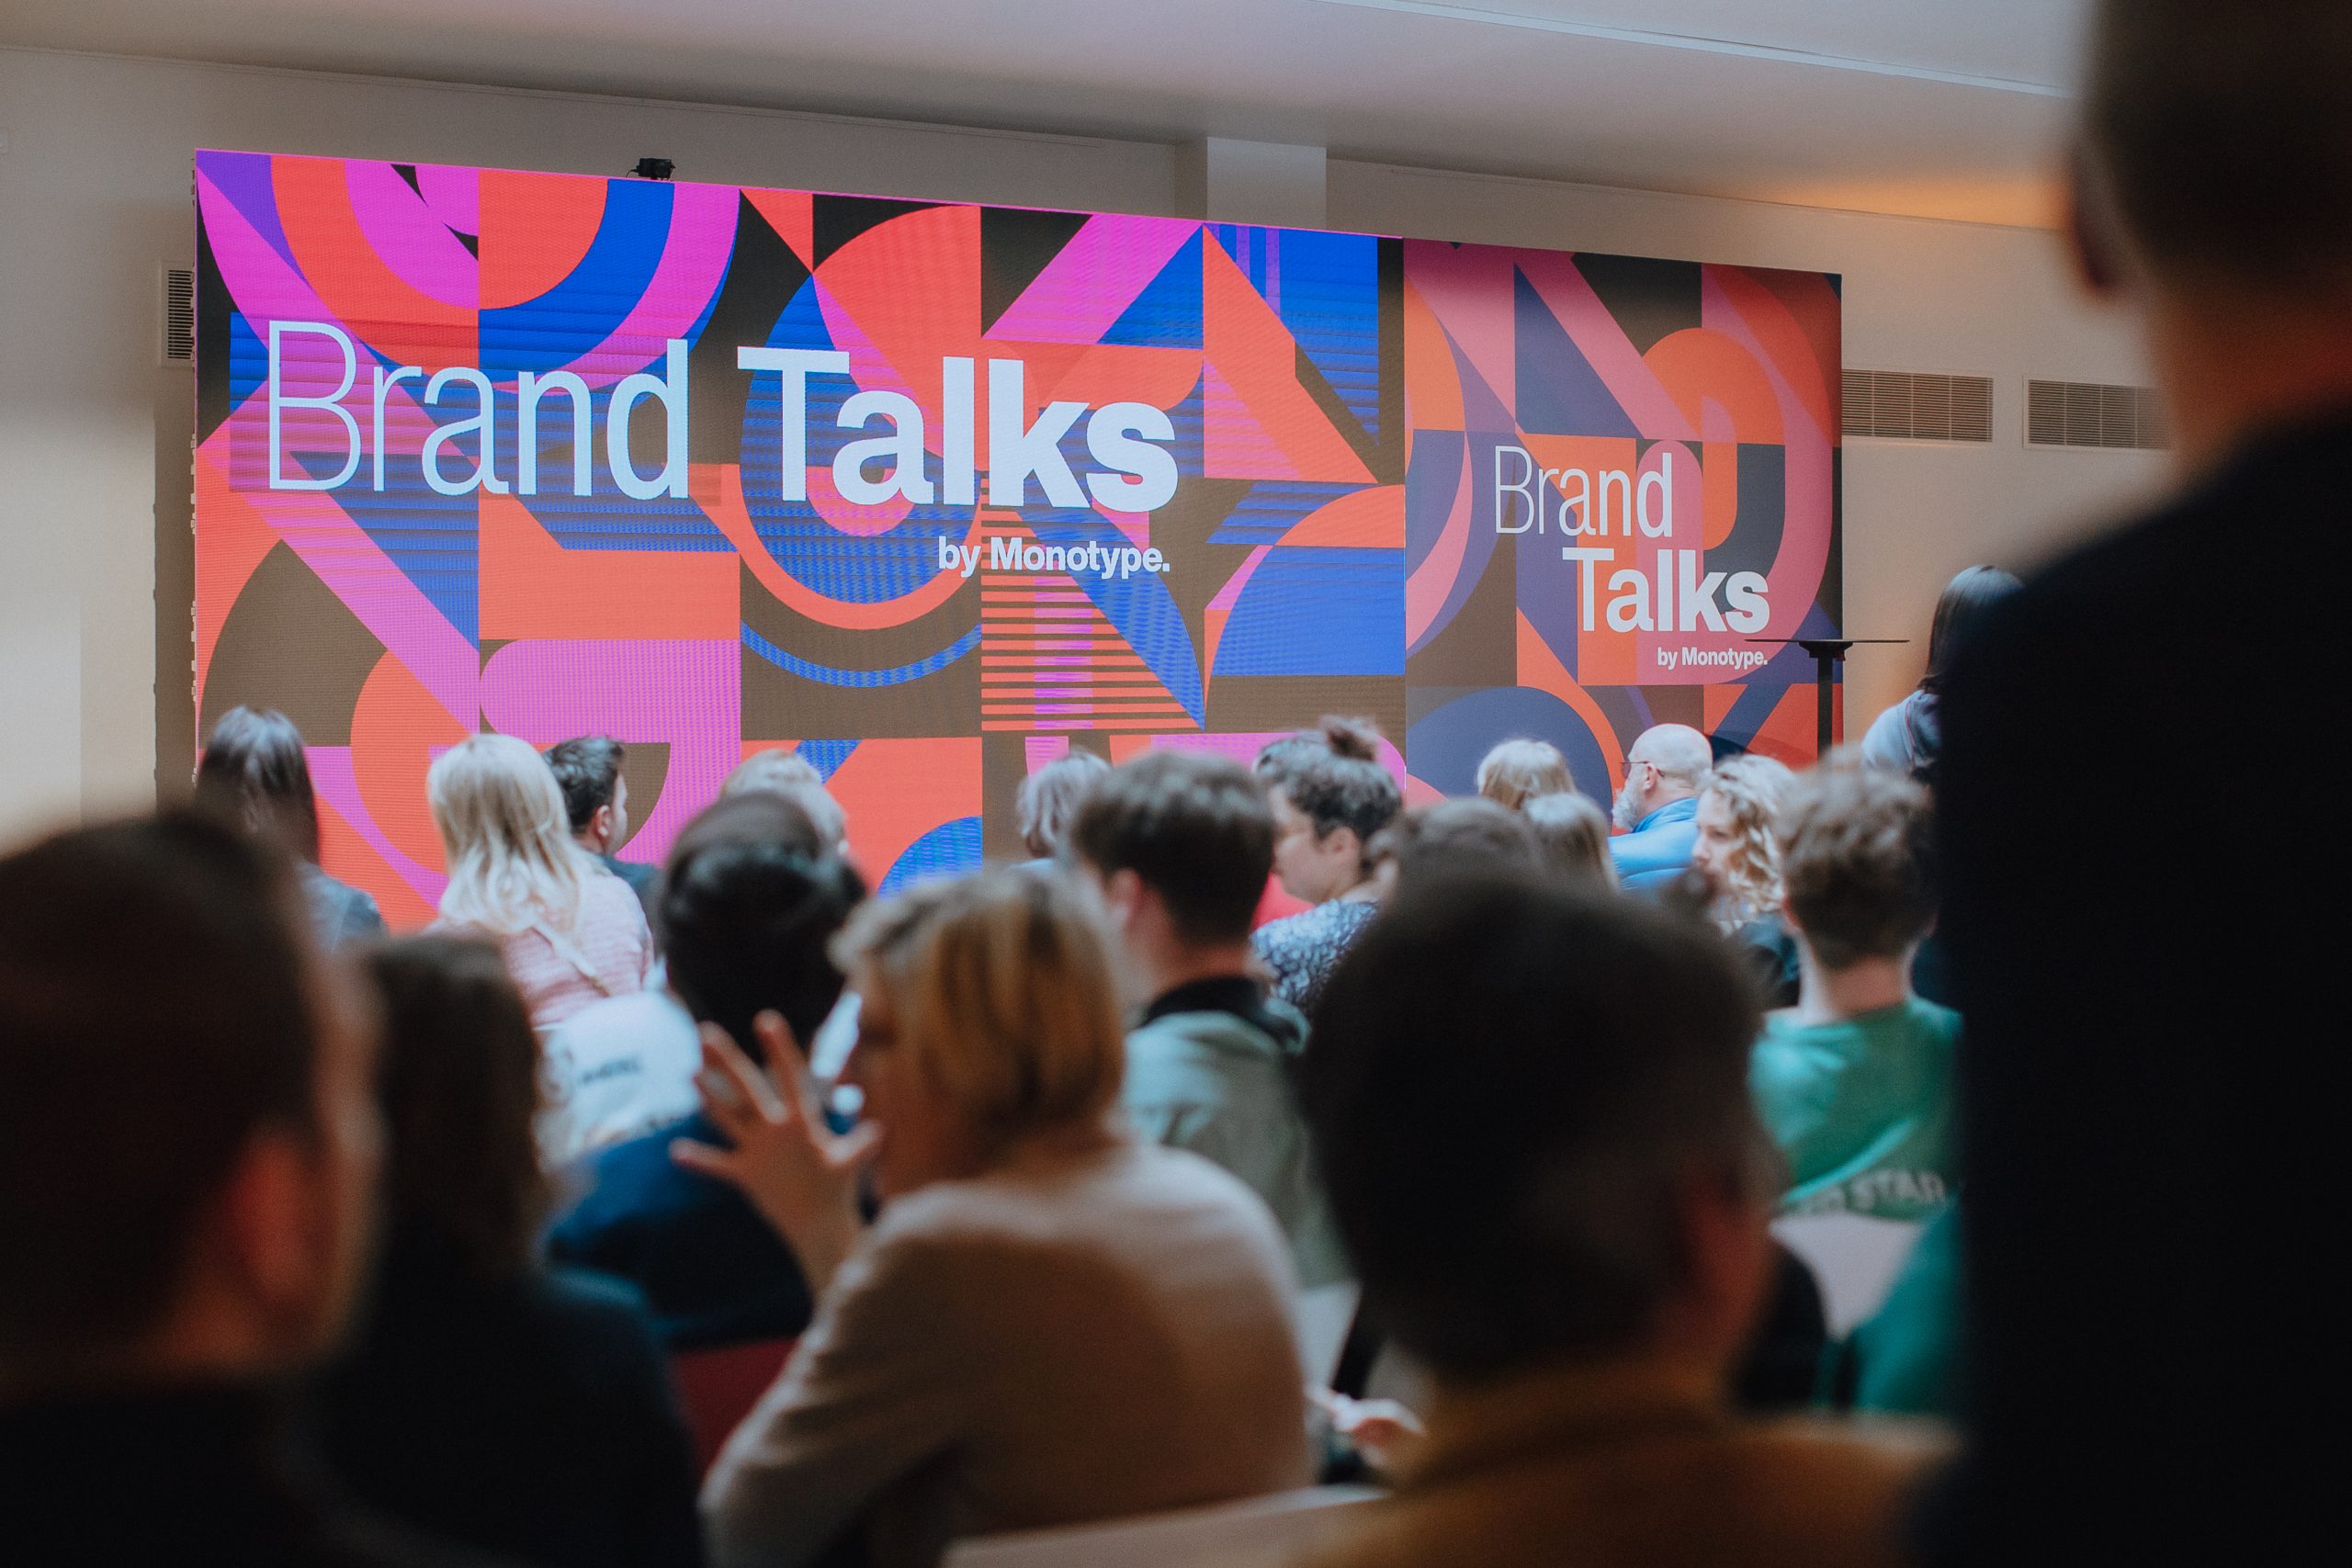 Brand Talks by Monotype is Coming to San Francisco June 15